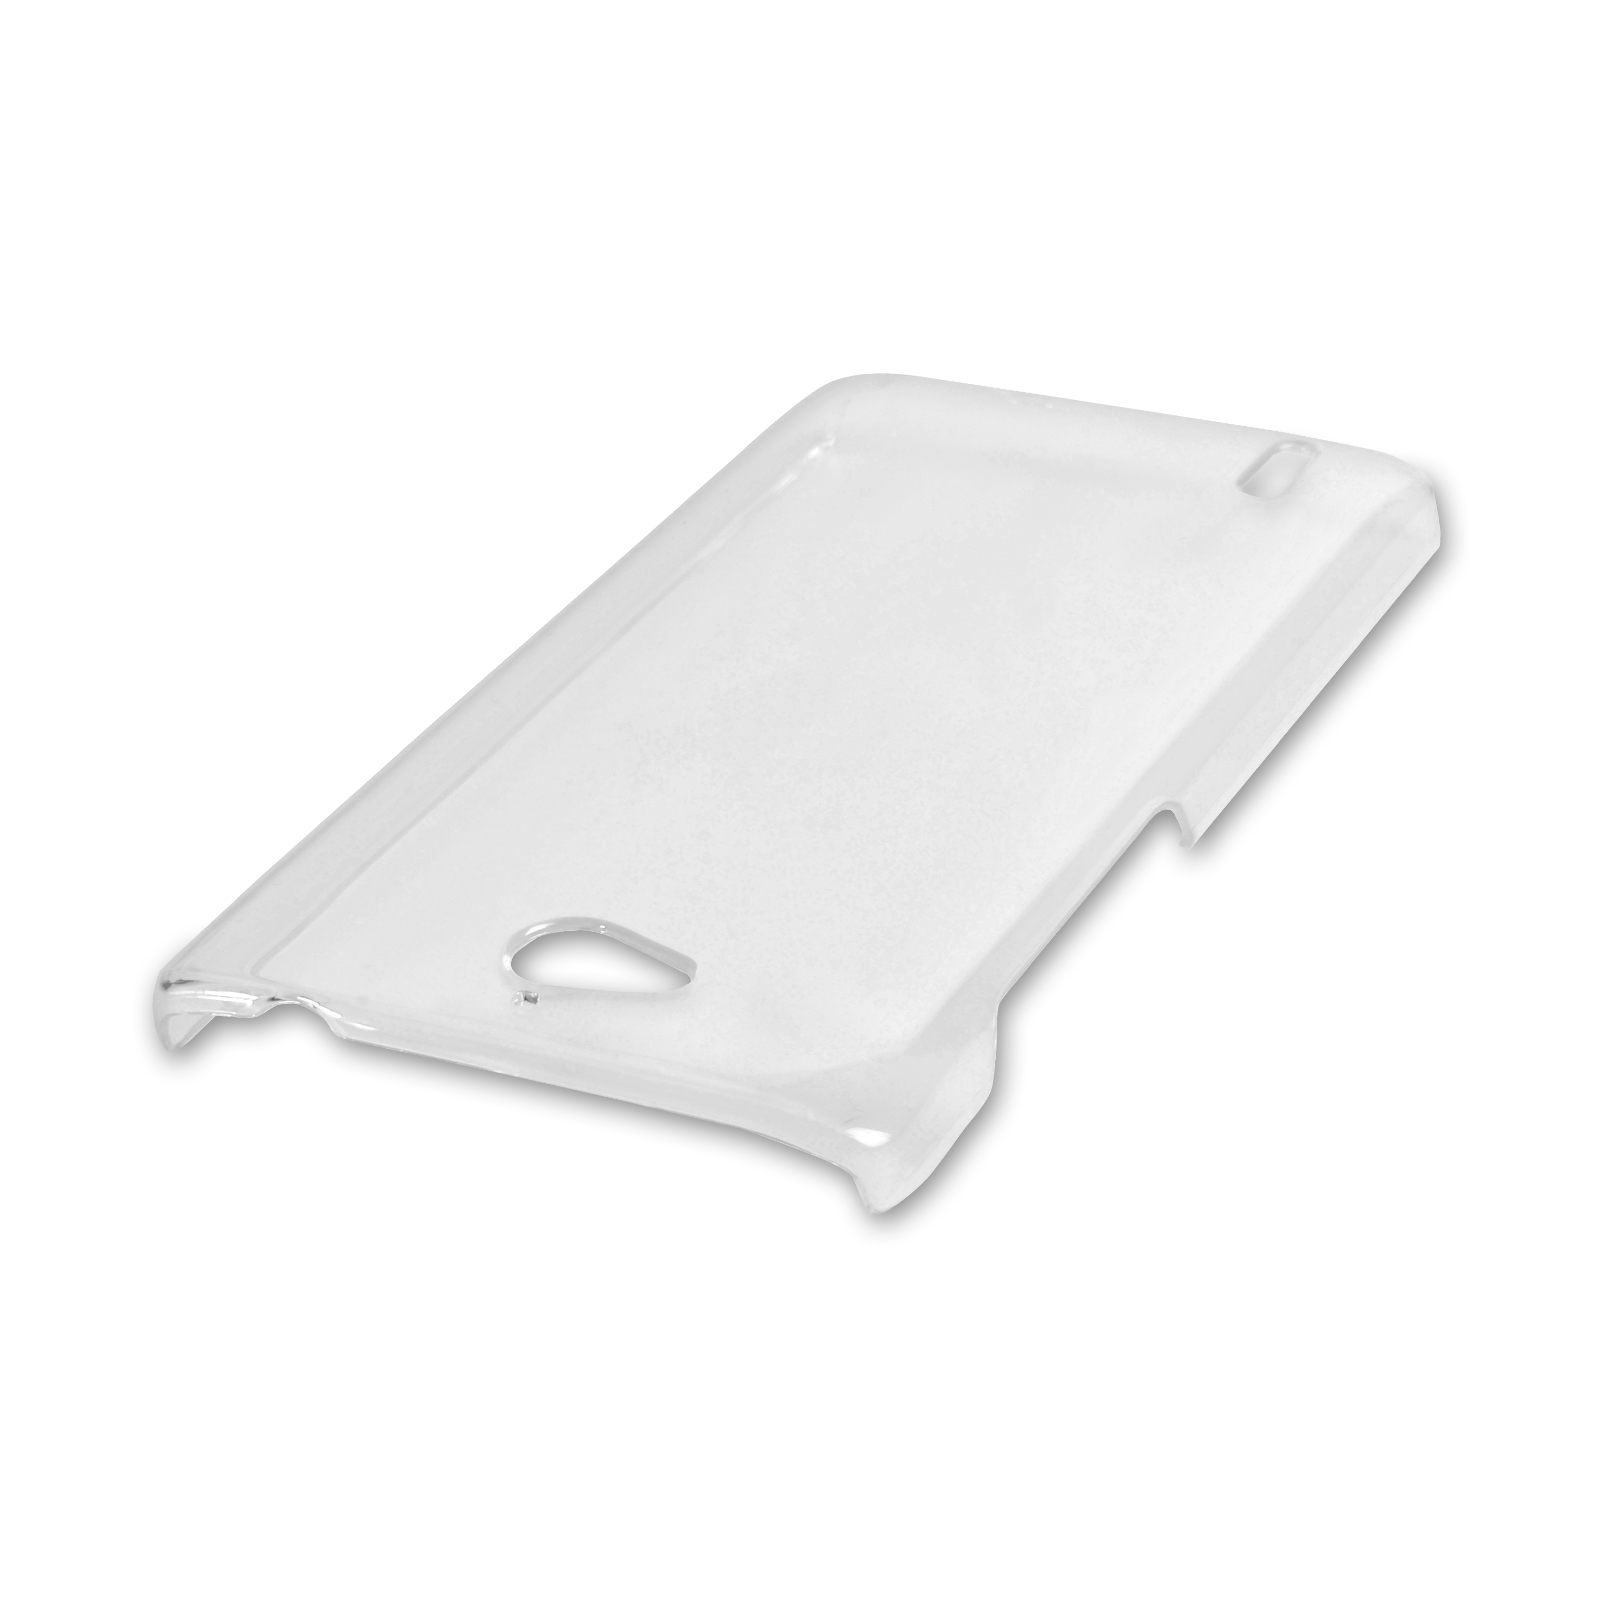 YouSave Accessories Huawei Ascend G740 Hard Case - Crystal Clear